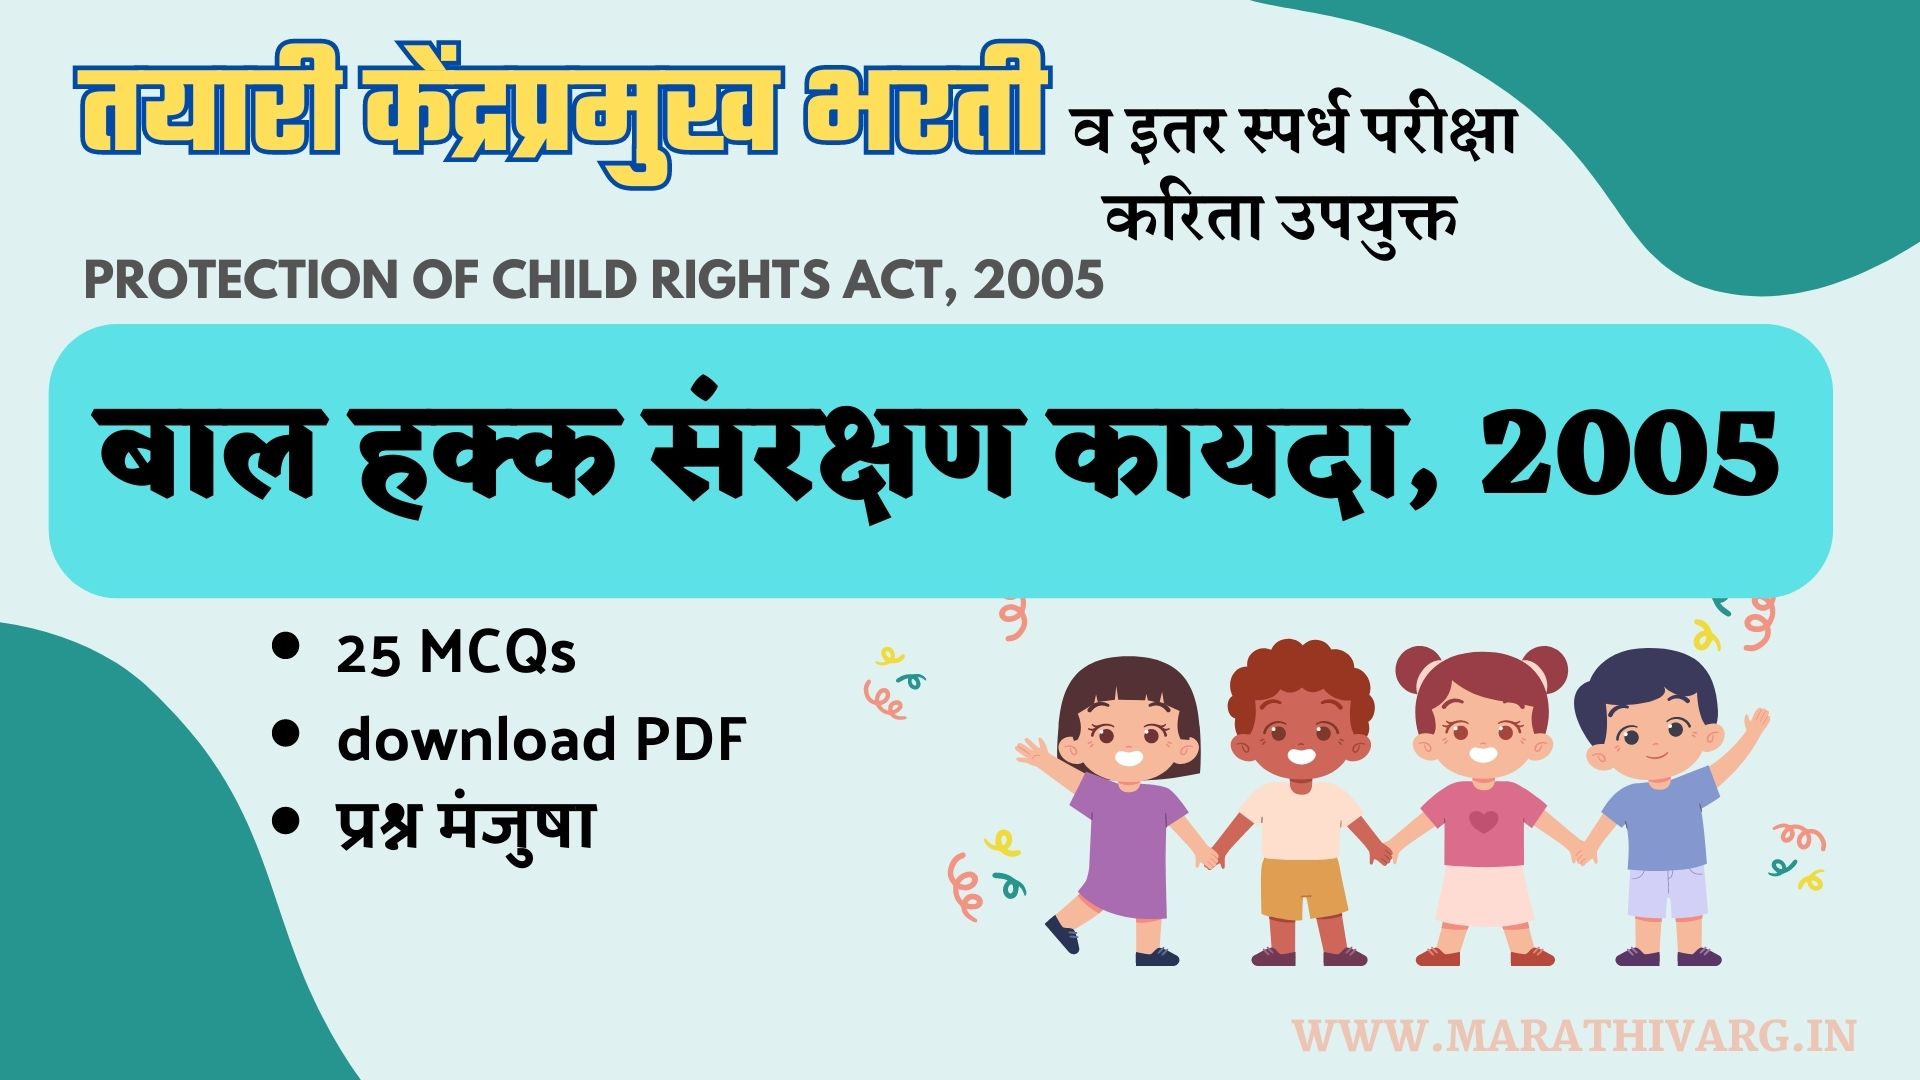 quiz on Protection of Child Rights Act 2005 in marathi